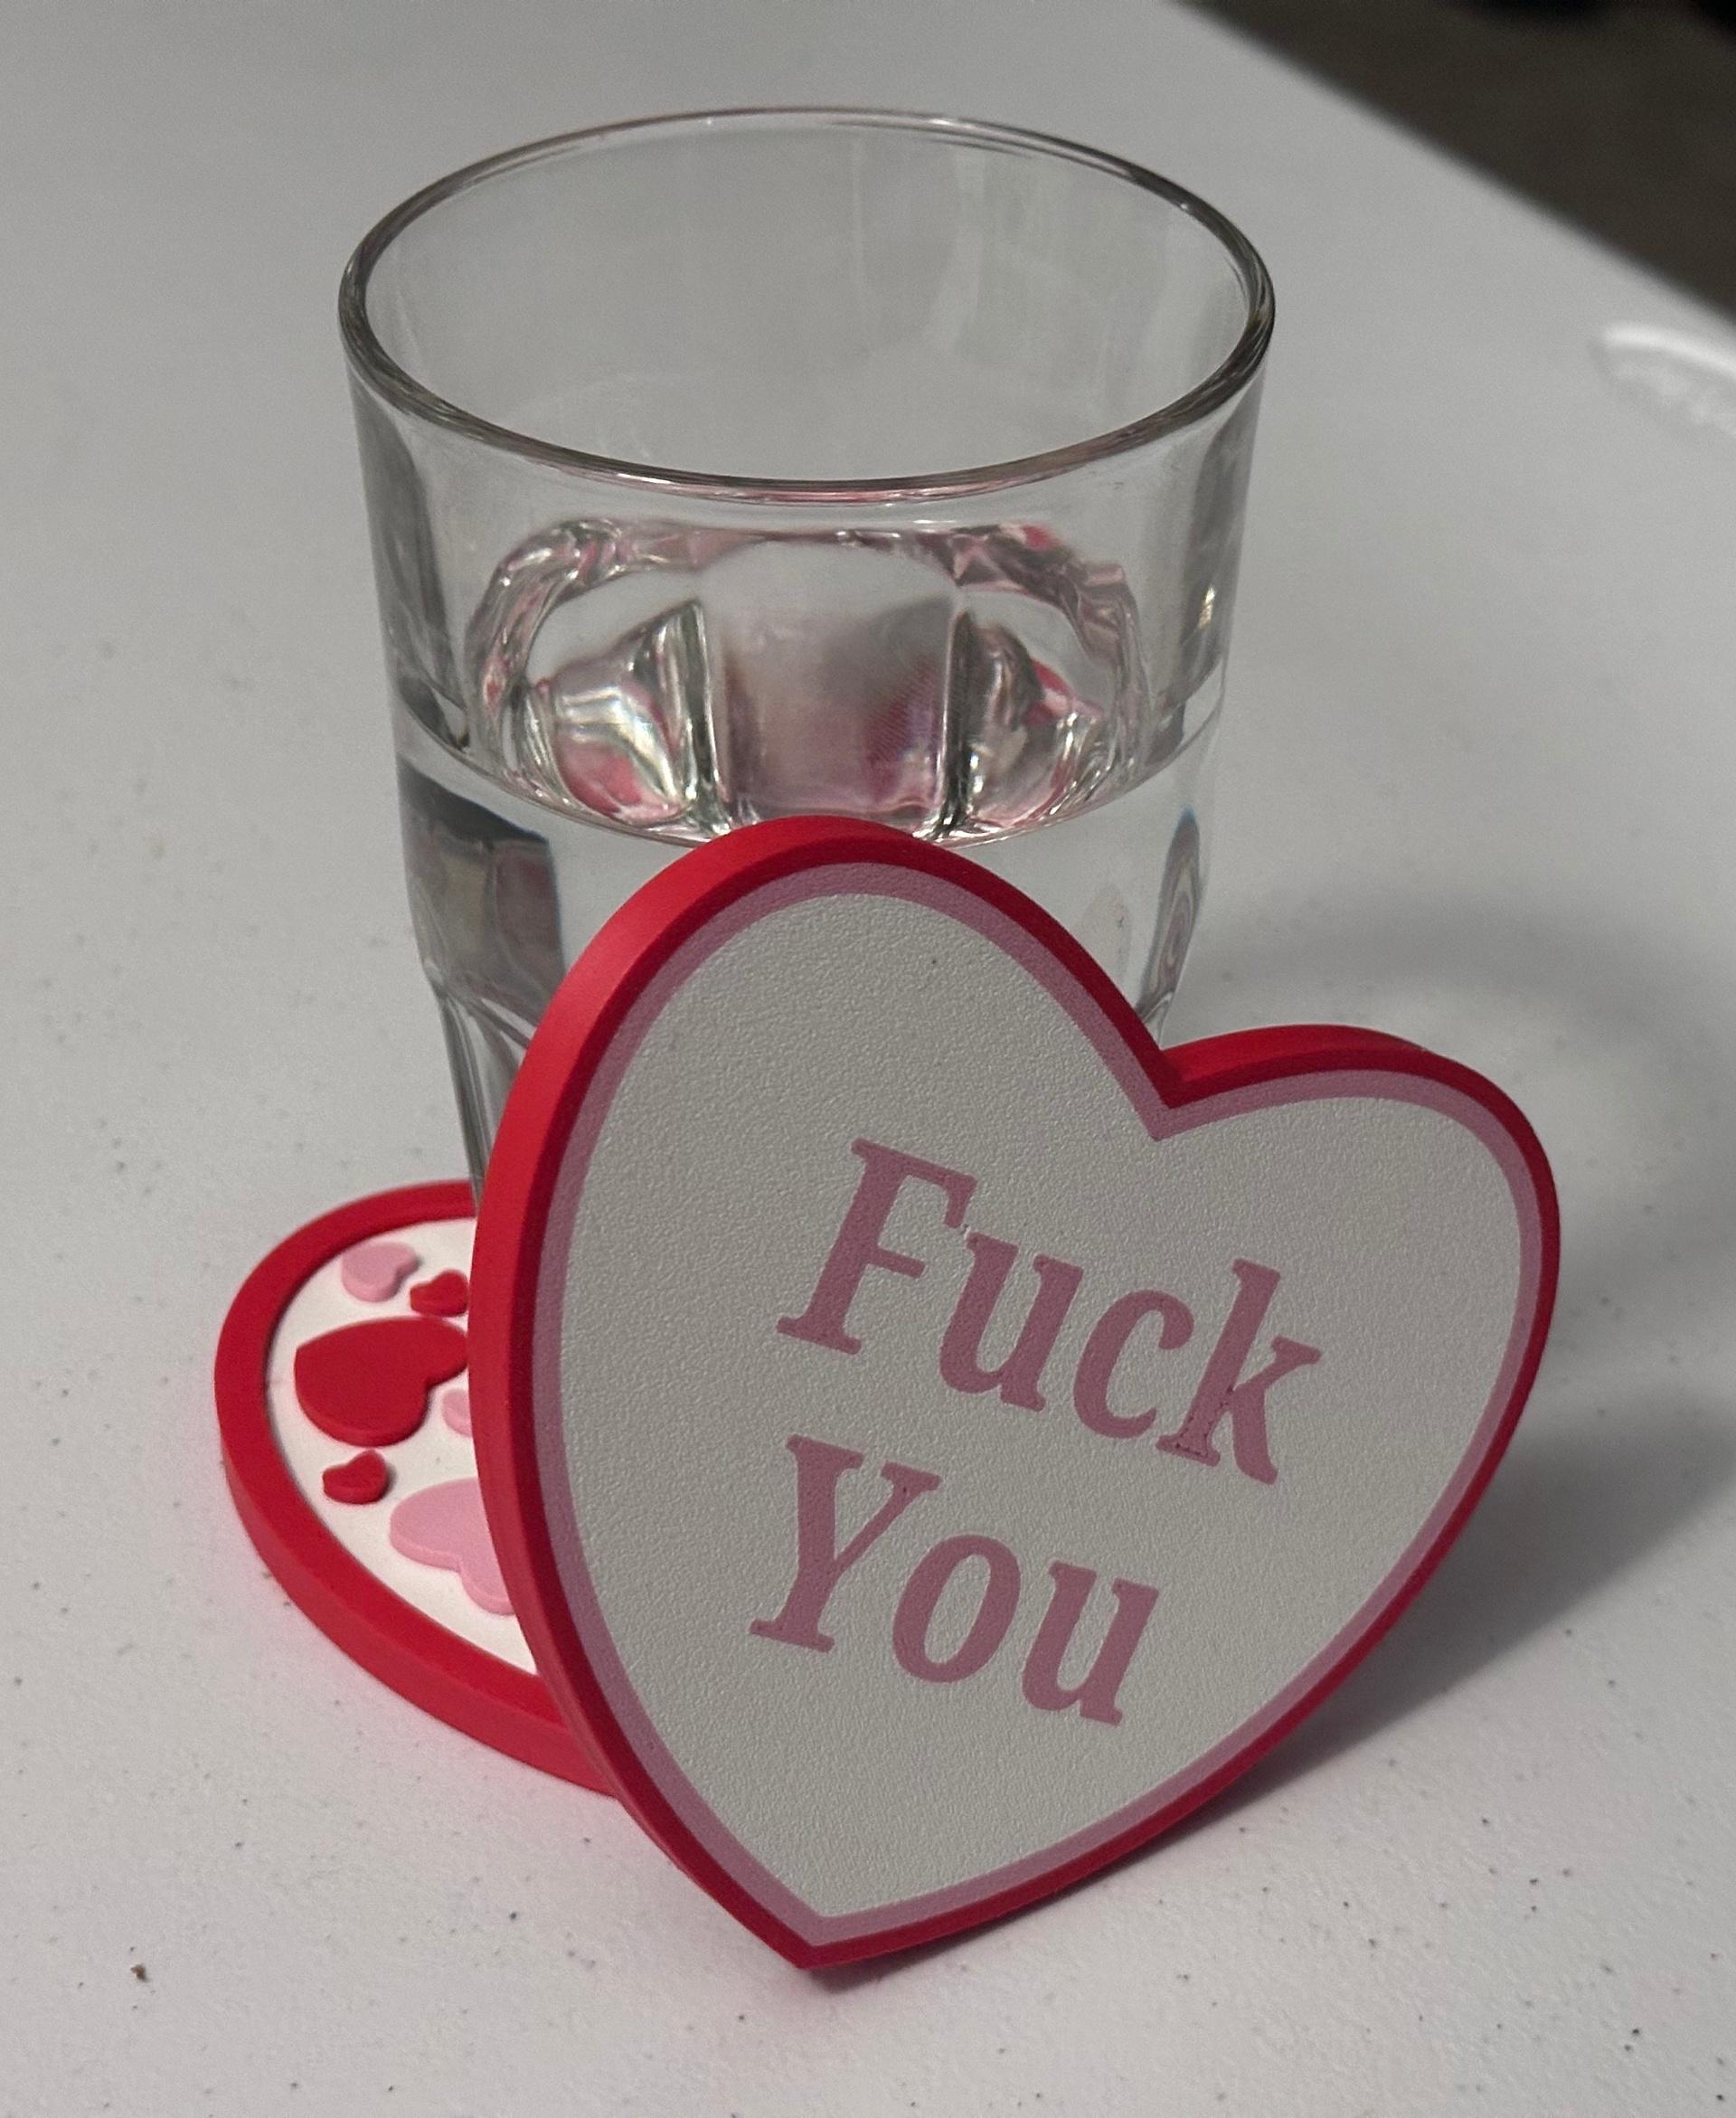 Reversible Hate Heart Coaster - The coaster in use - 3d model